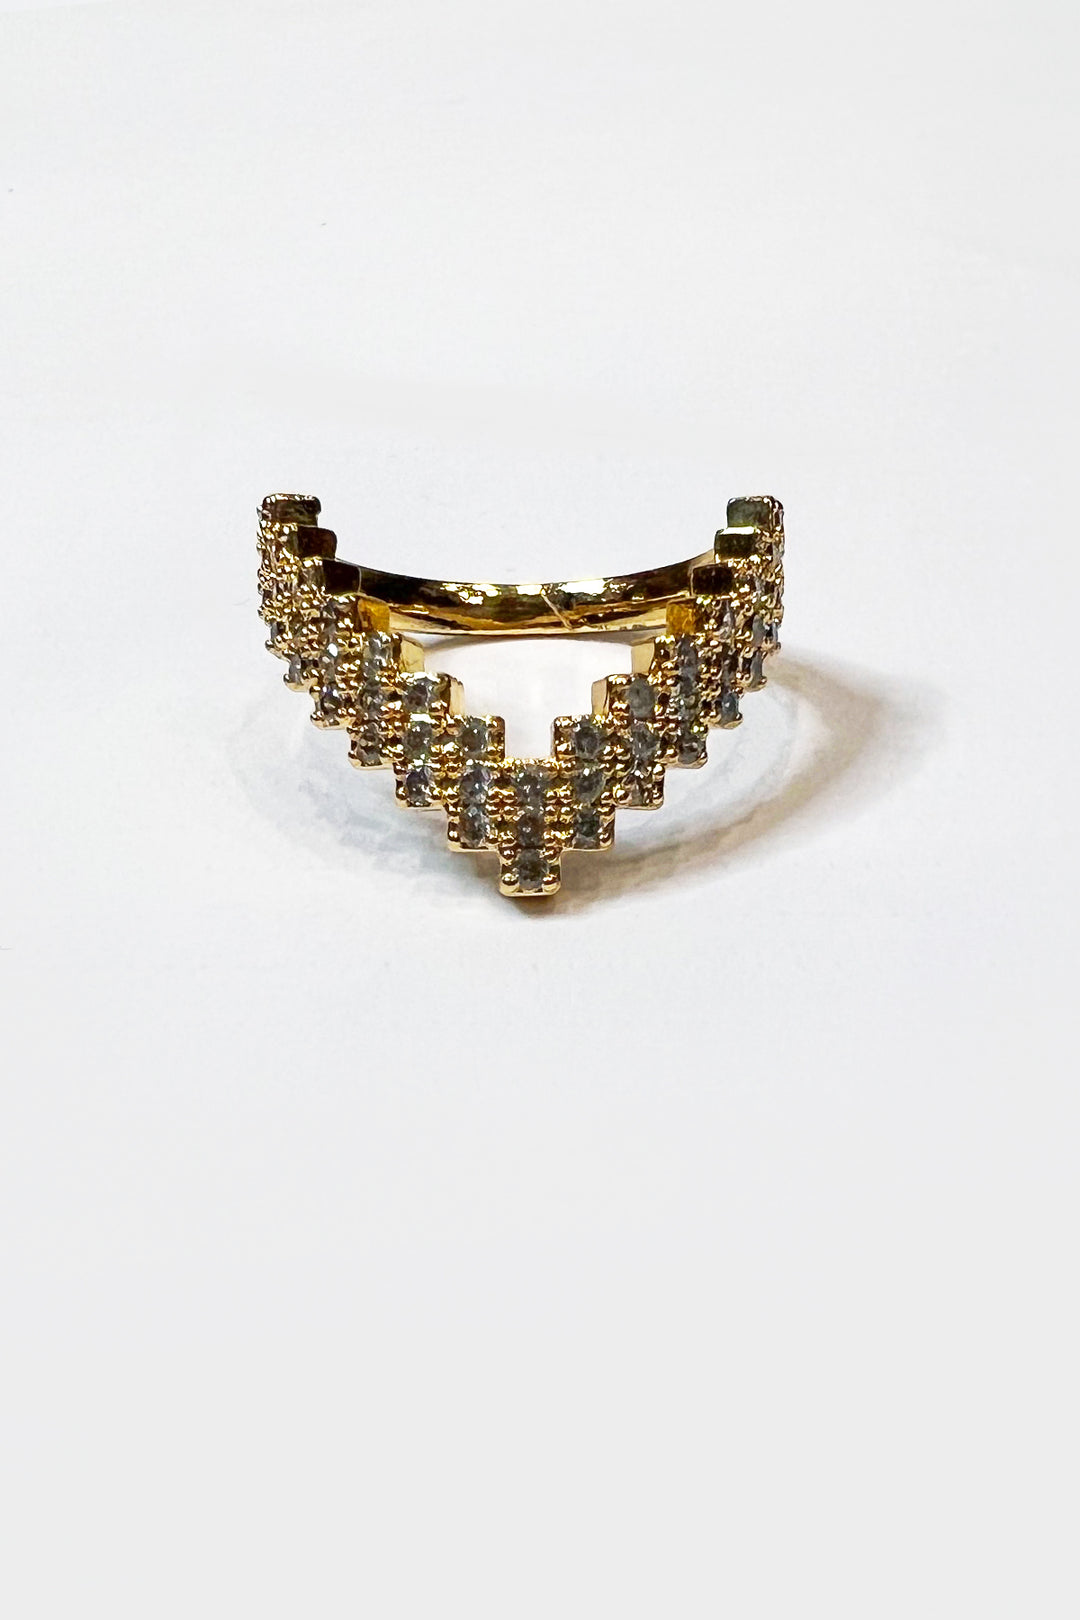 Gold Ensign Ring - S23 - WJW0063